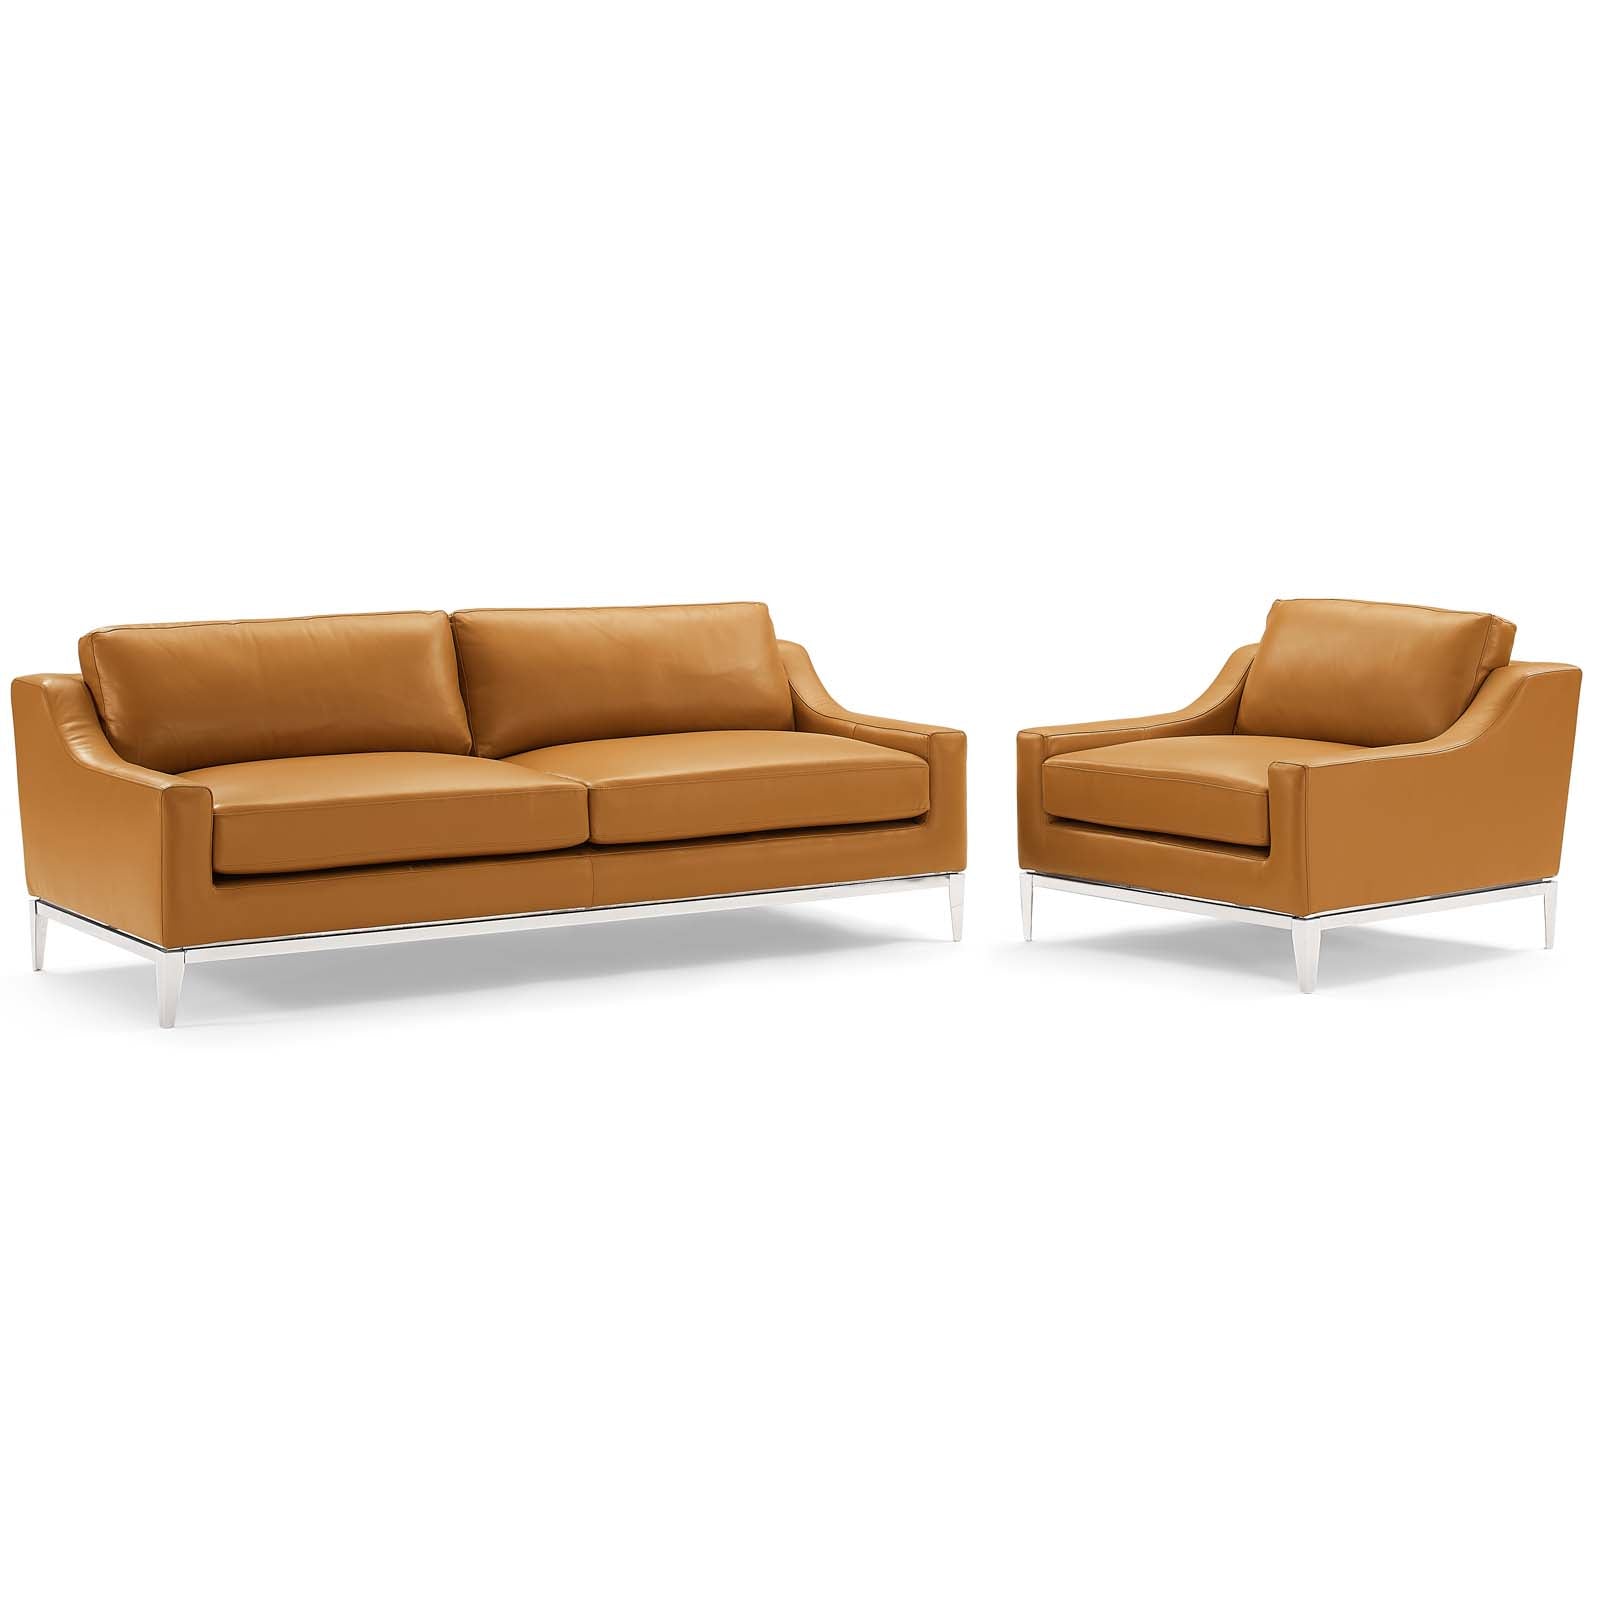 Modway Sofas & Couches - Harness-Stainless-Steel-Base-Leather-Sofa-&-Armchair-Set-Tan